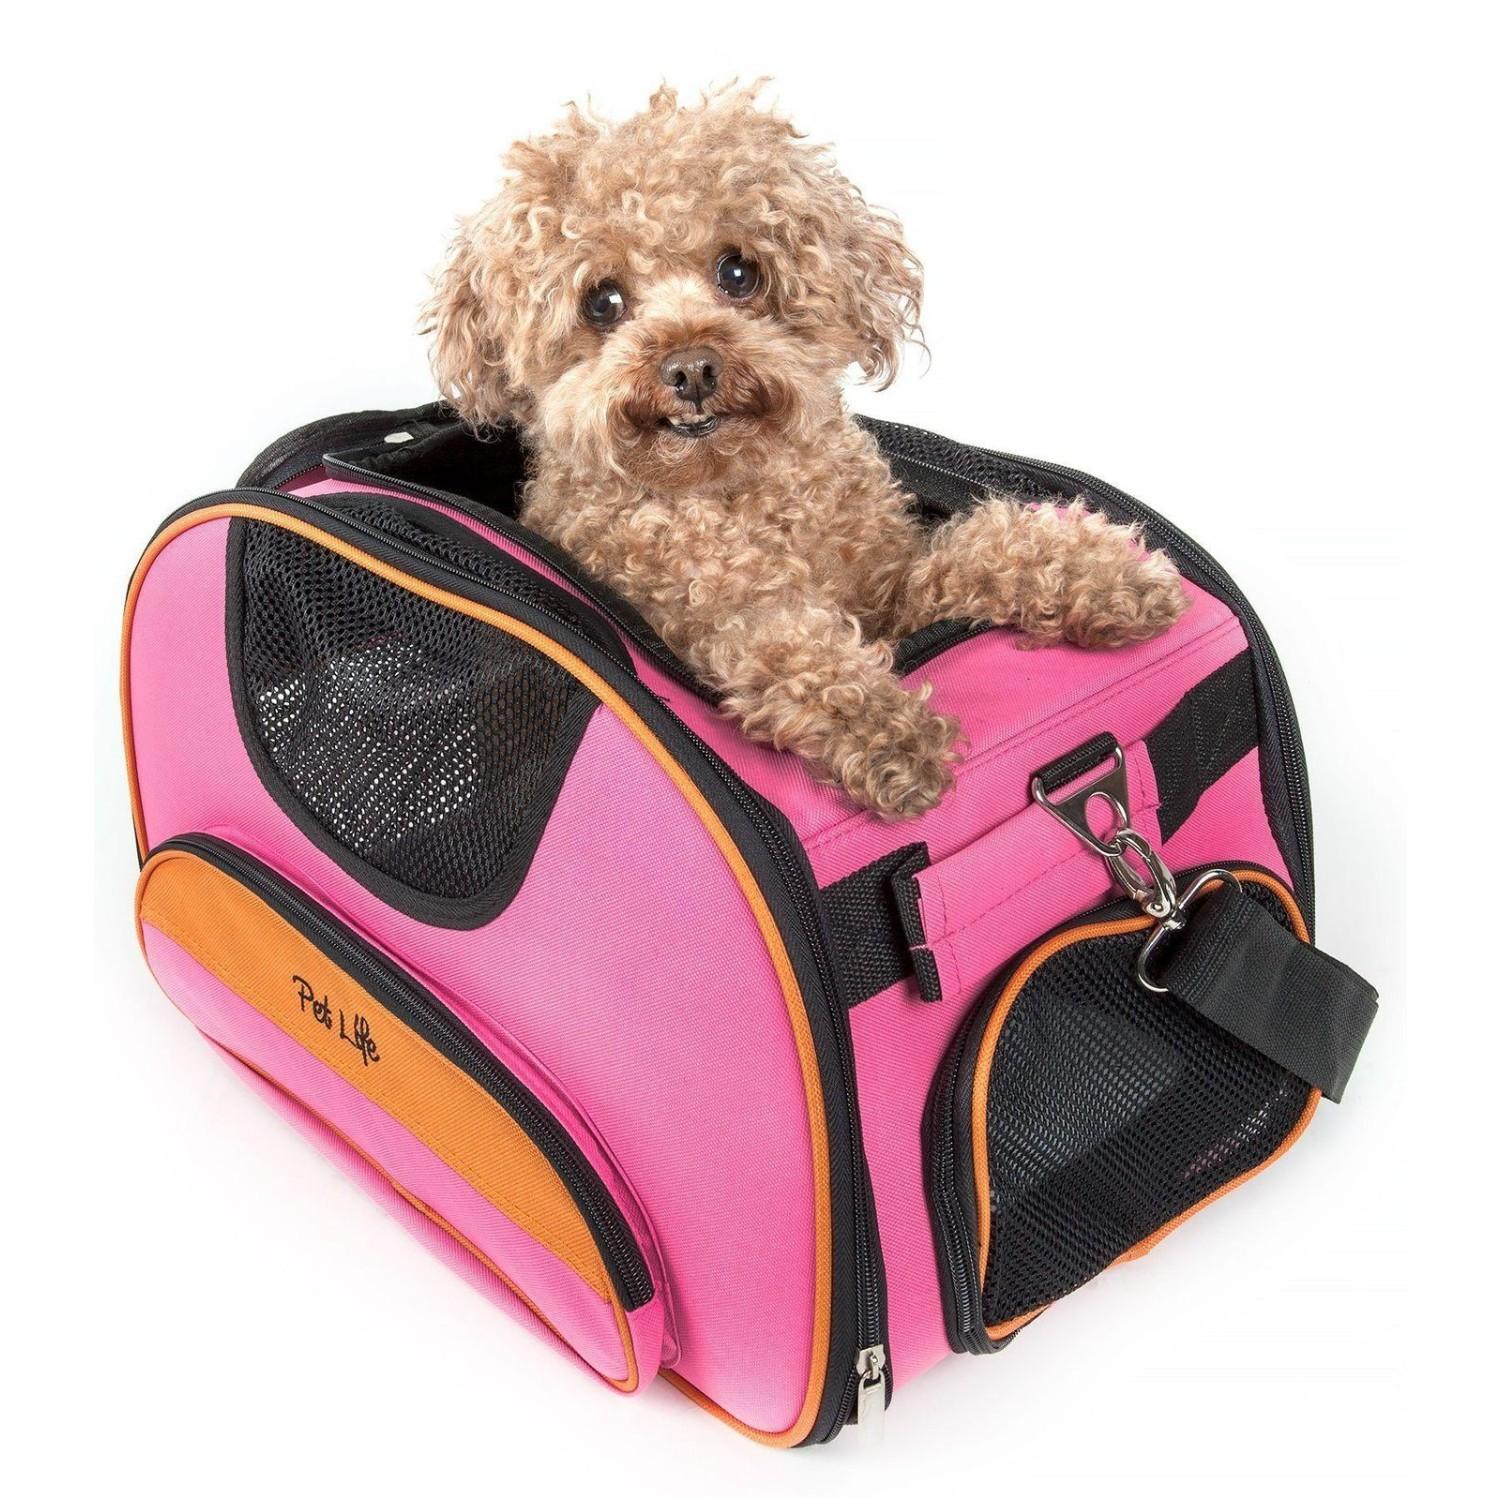 Pet Life Sky-Max Sporty Dog Carrier - Pink